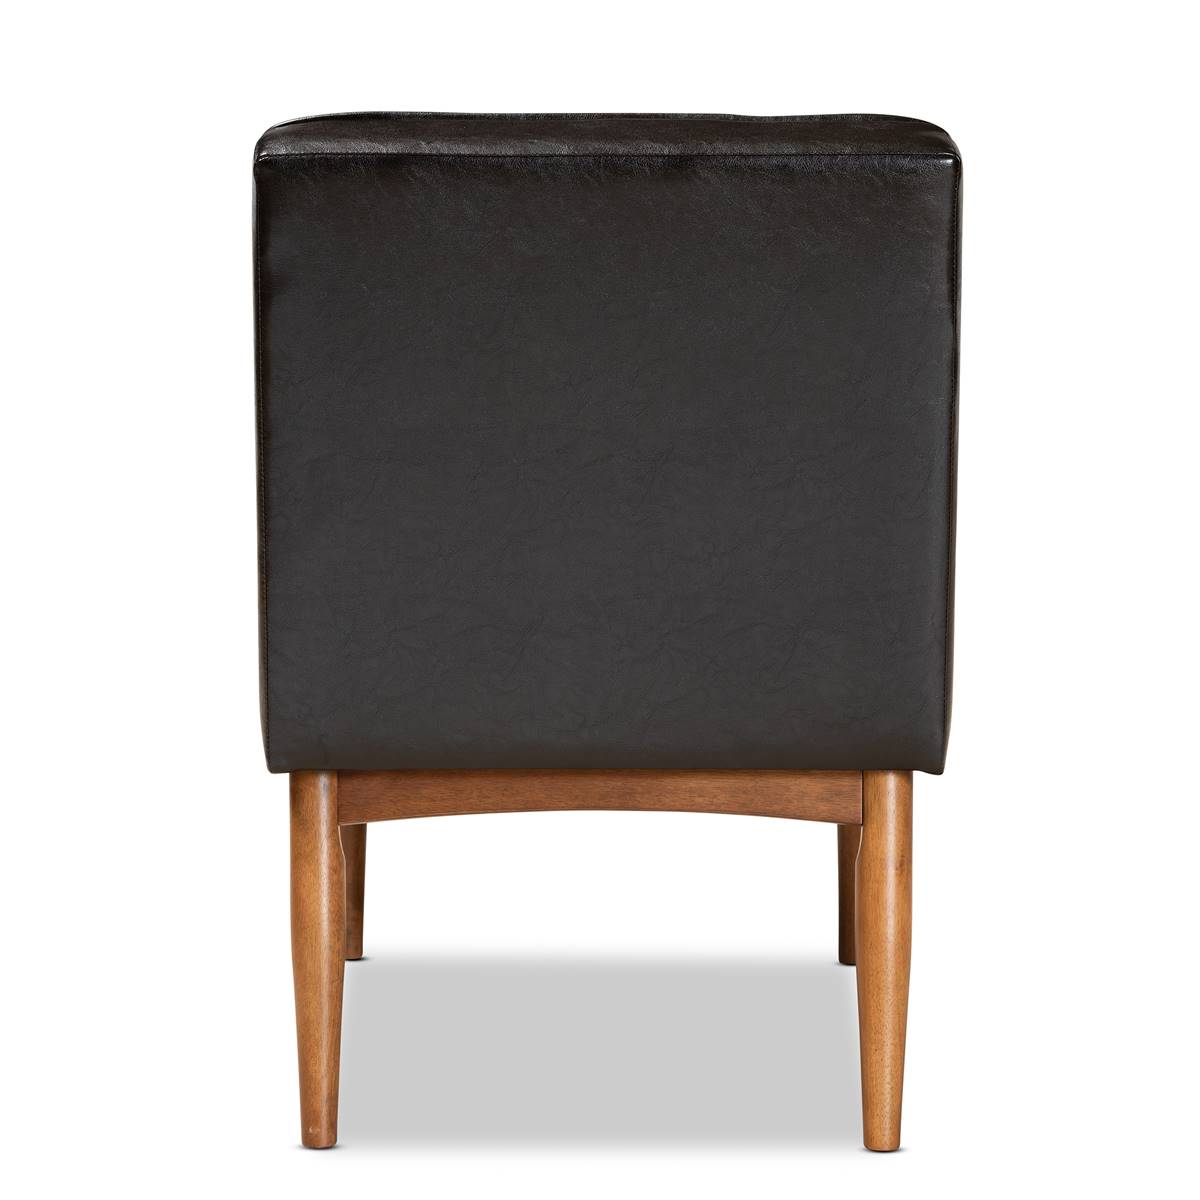 Baxton Studio Sanford Faux Leather & Brown Wood Dining Chair